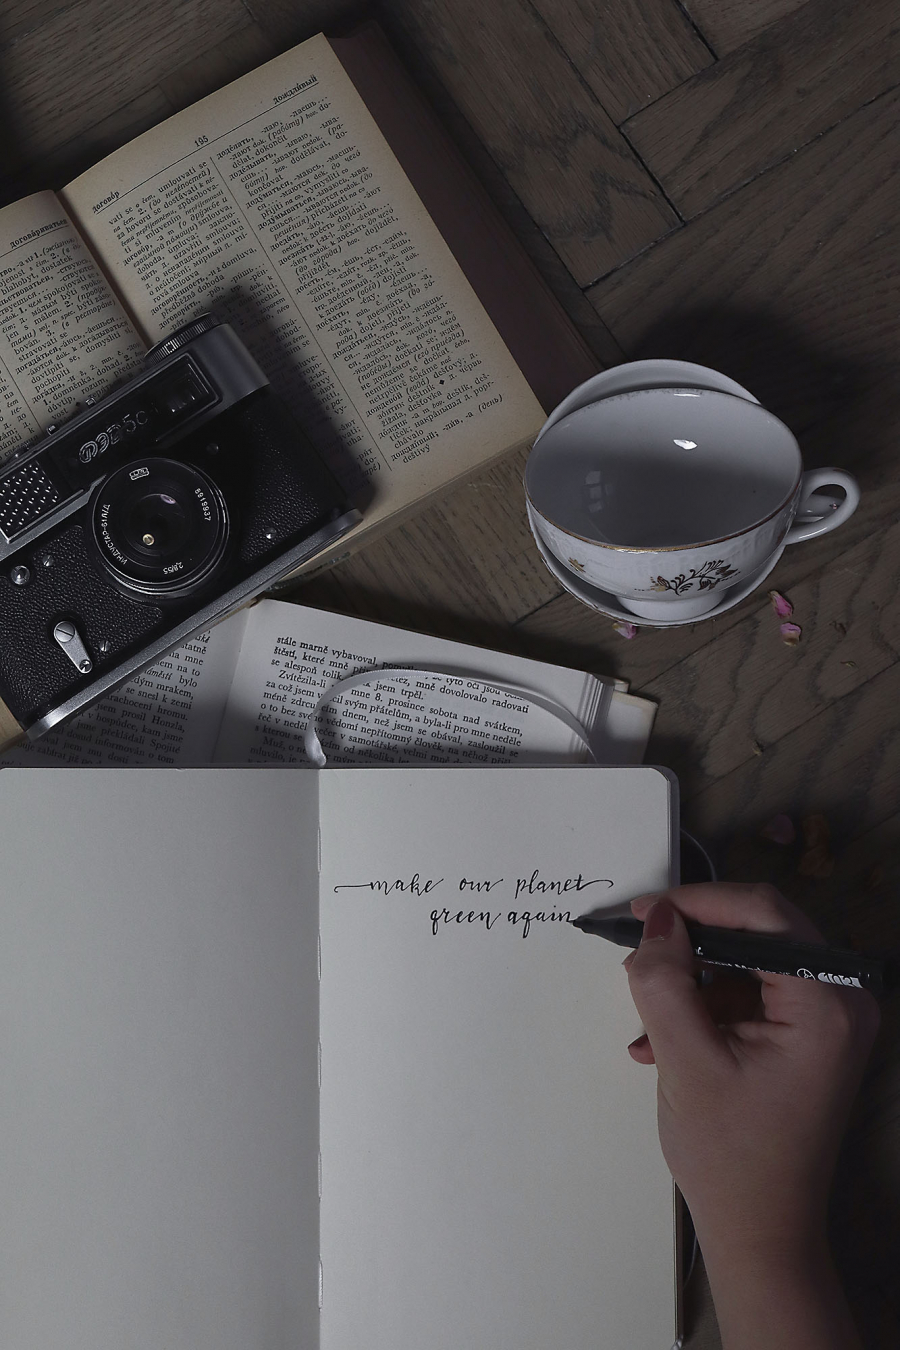 Books, photo camera, coffee cup, hand writing on a notebook